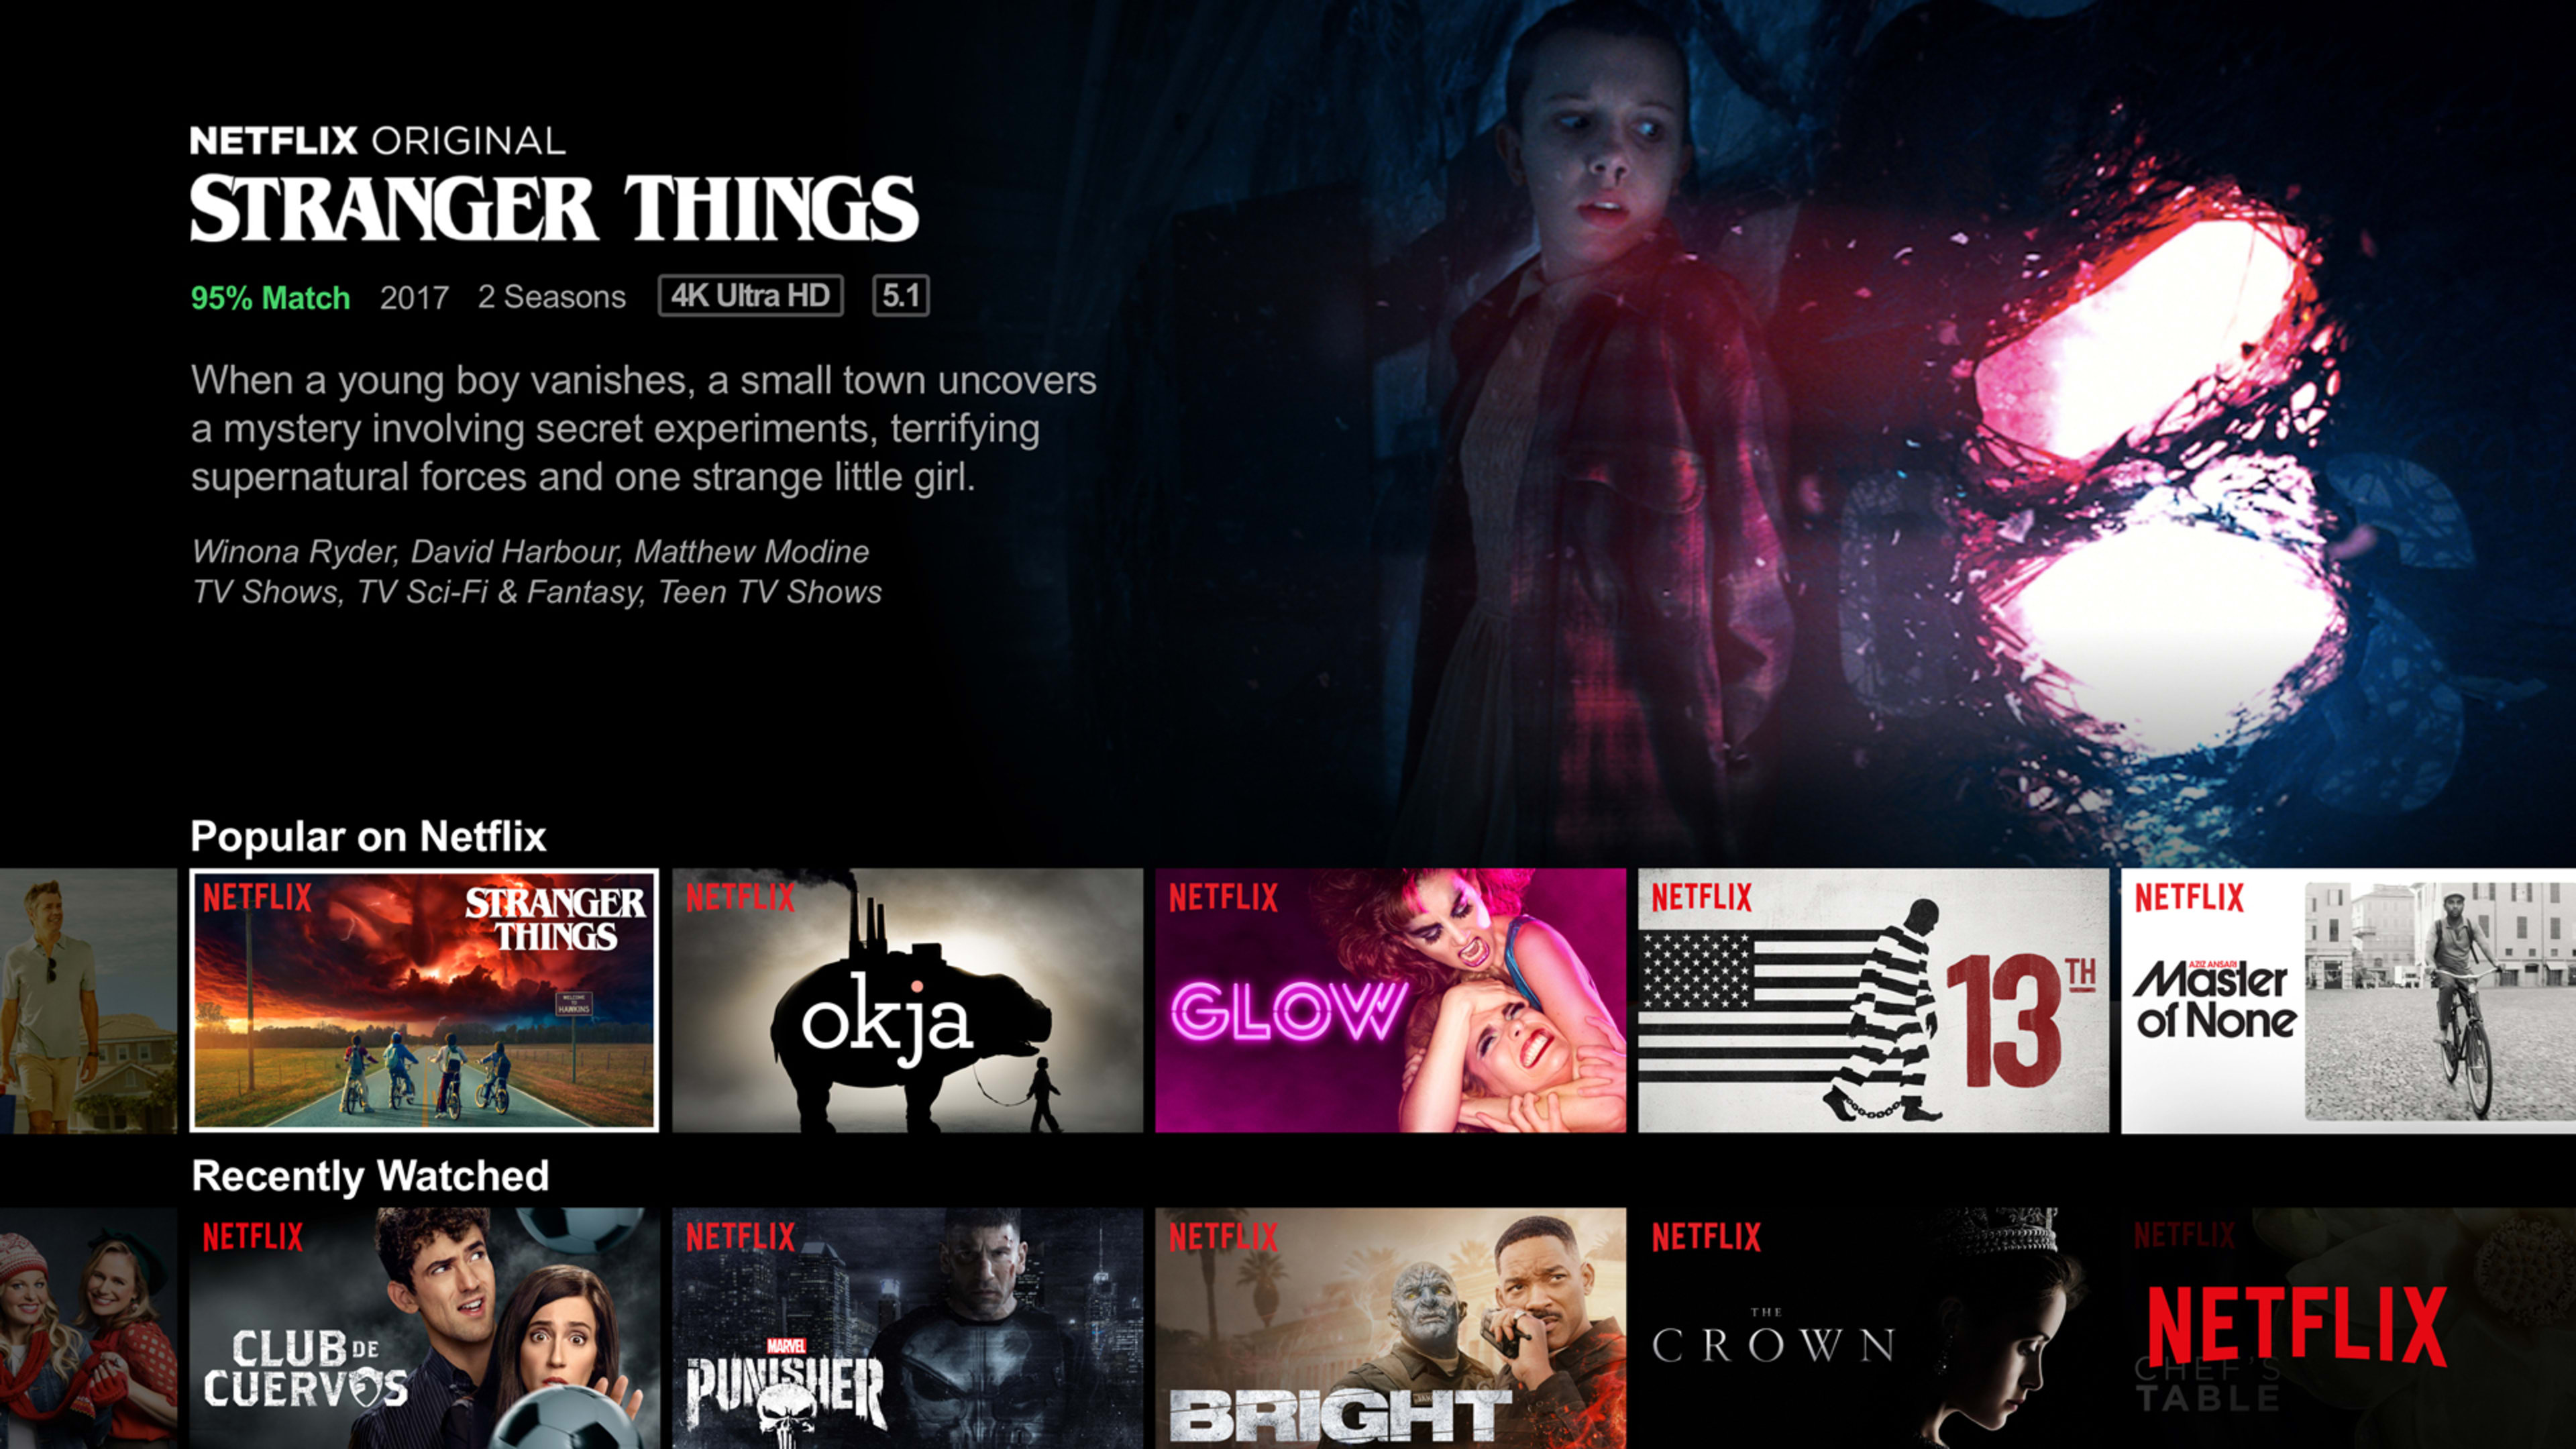 If Netflix has a trailer section now, can it stop doing auto-play elsewhere?